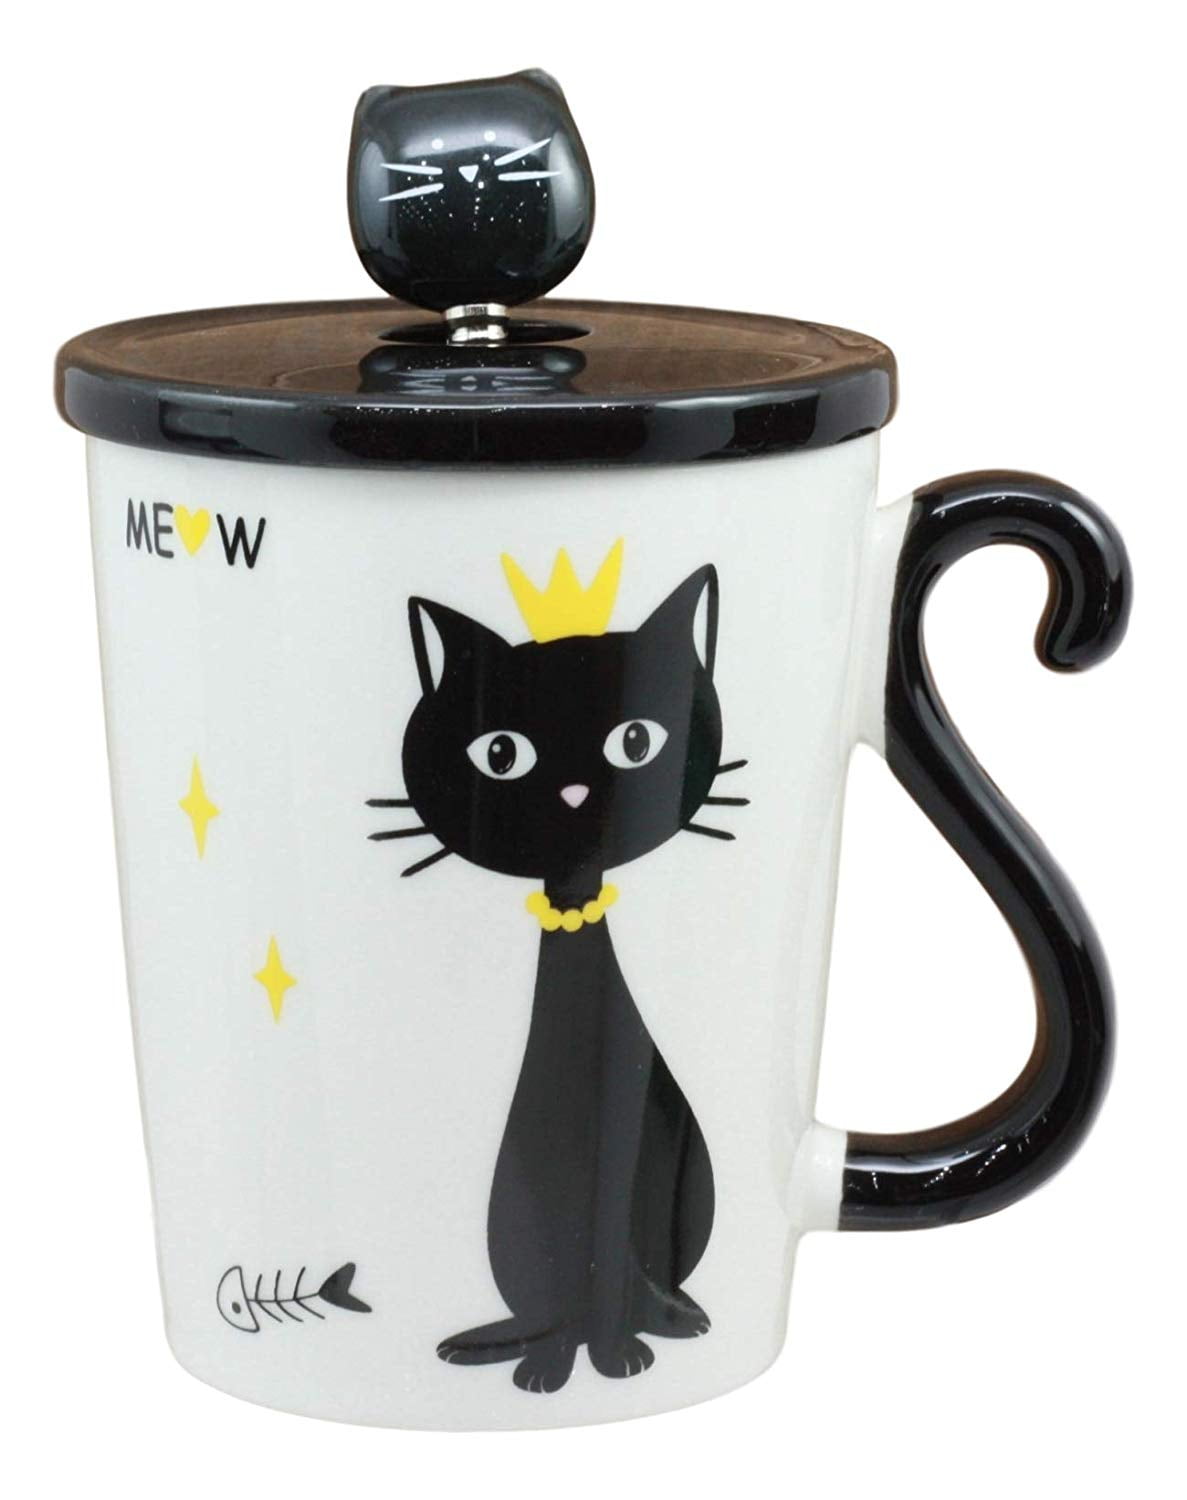 Ebros Witching Hour Black Cat With Golden Crown Ceramic Coffee Tea Mug Drink Cup With Kitty Spoon And Lid 10oz Animal Kittens Or Cats Decor Collectible Kitchen Accessory For Kids and Adults